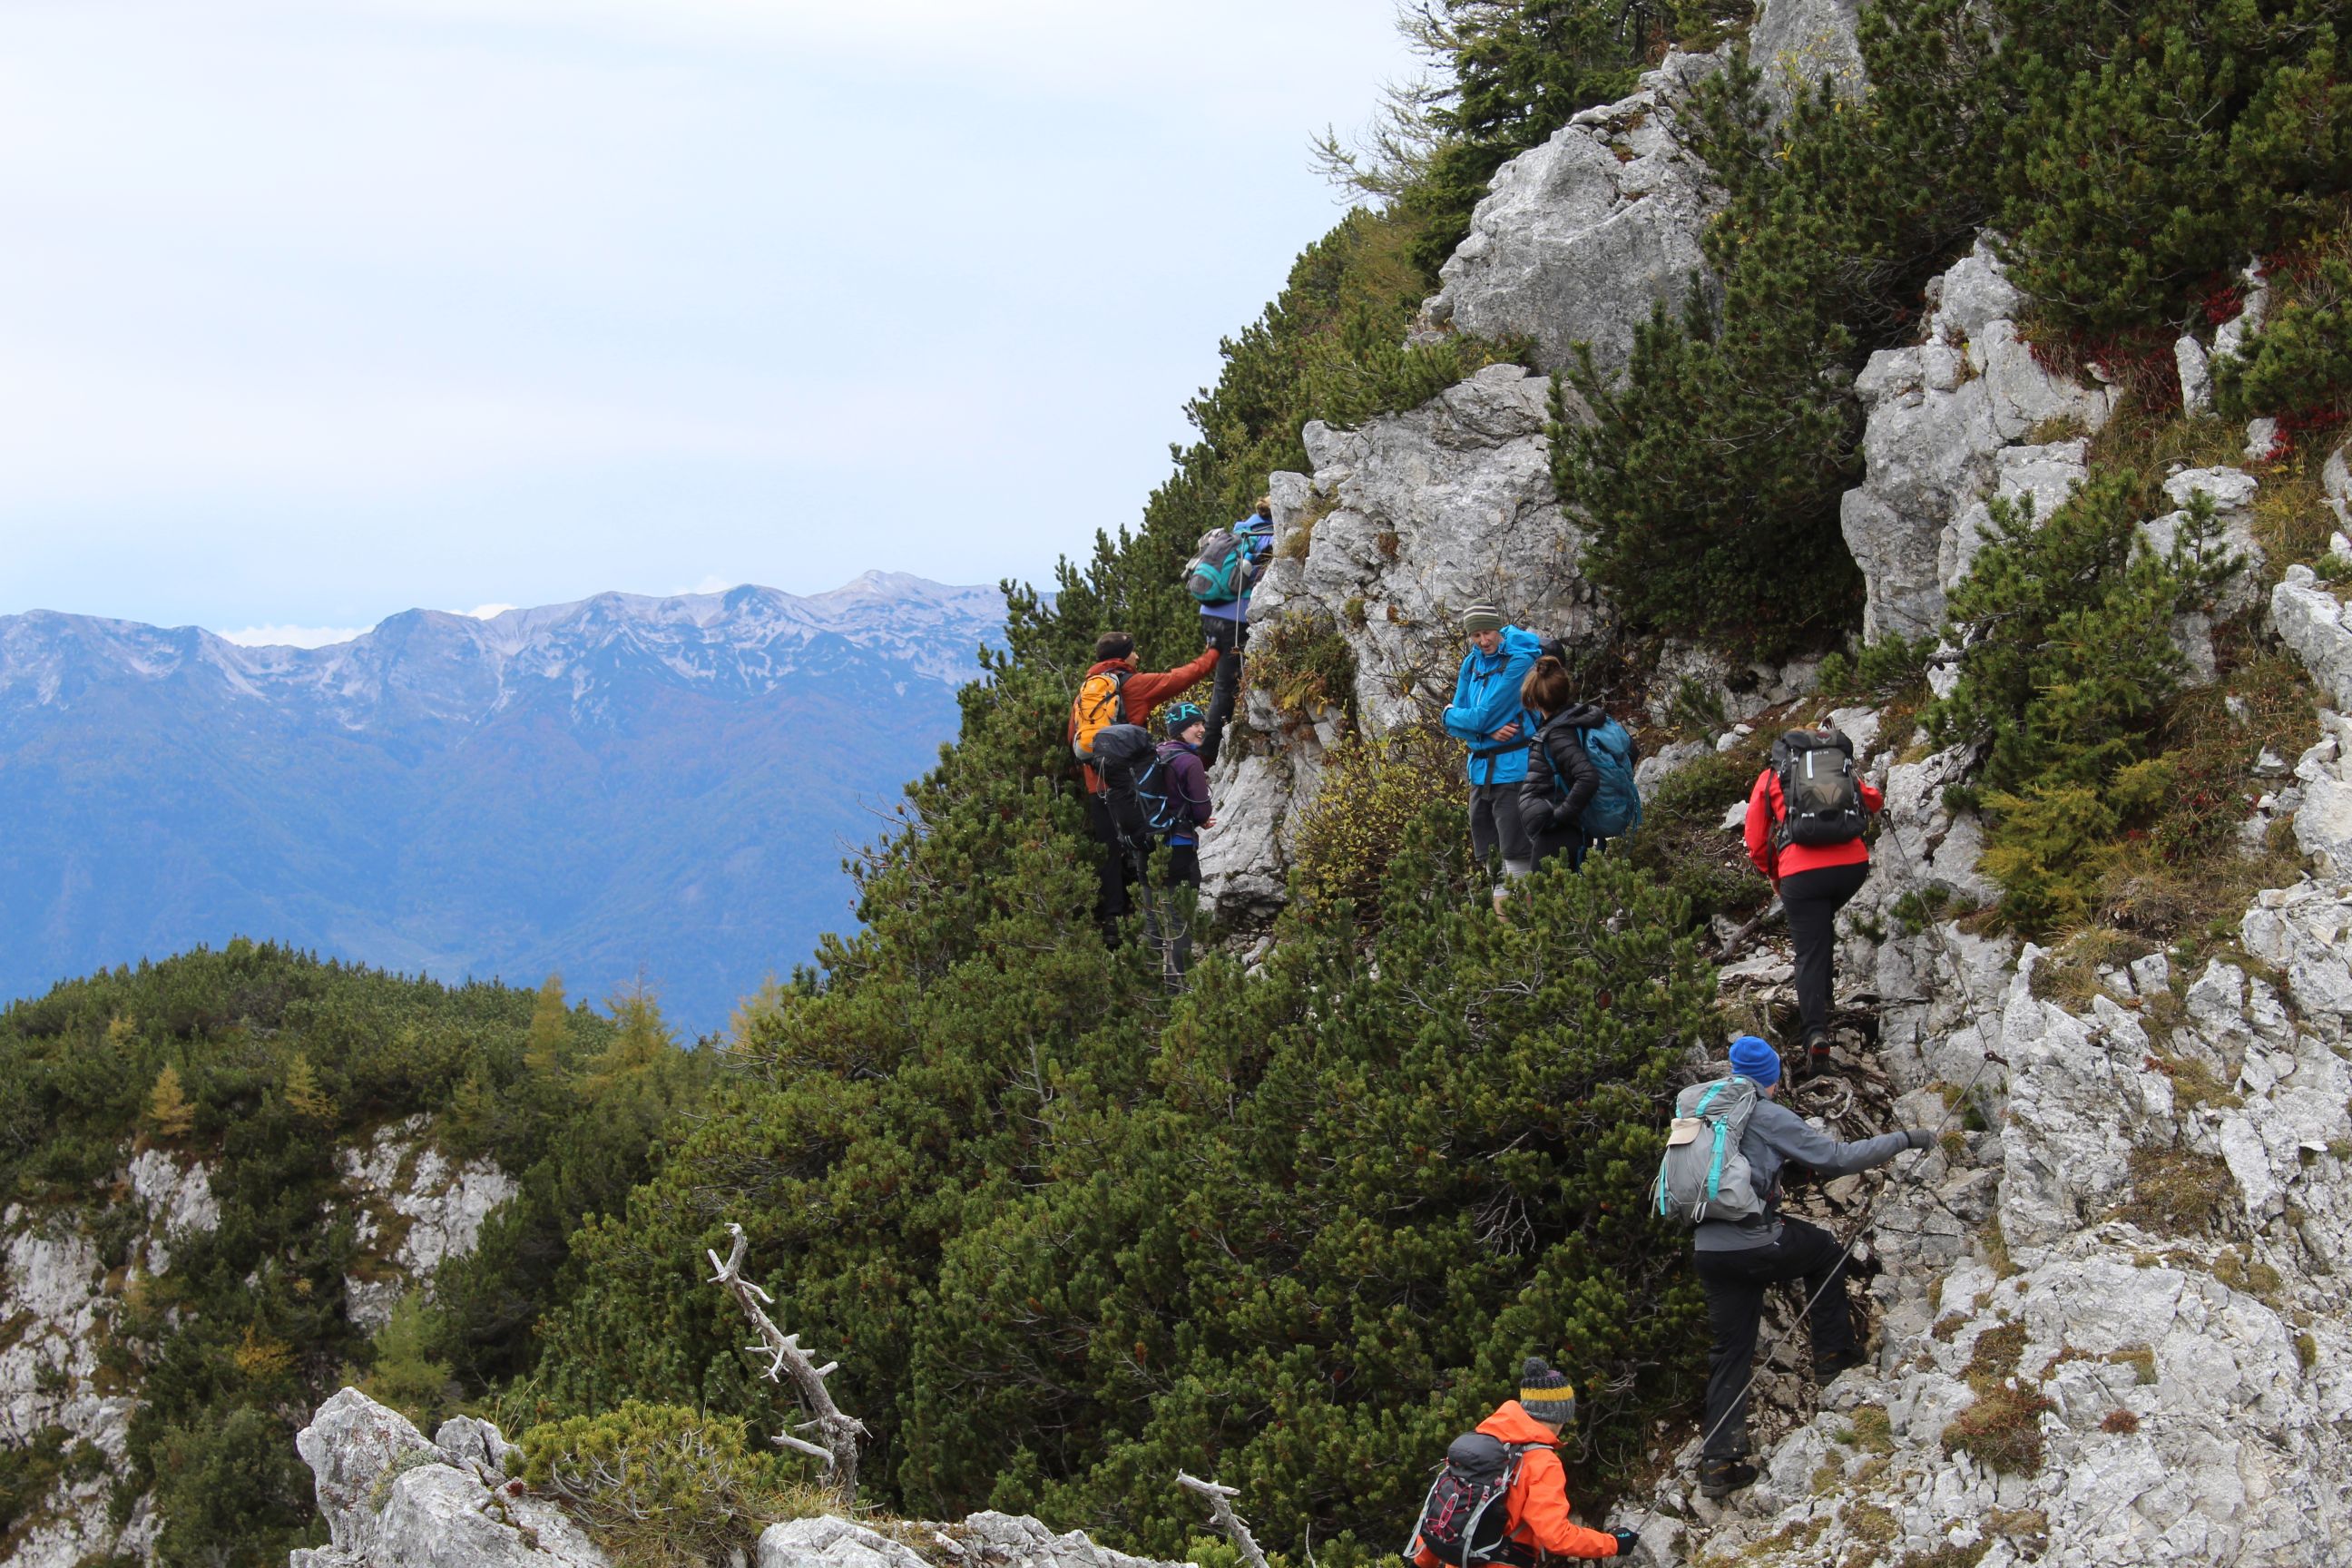 A hiking group scrambling up a rocky slope in Slovenia's Julian Alps.